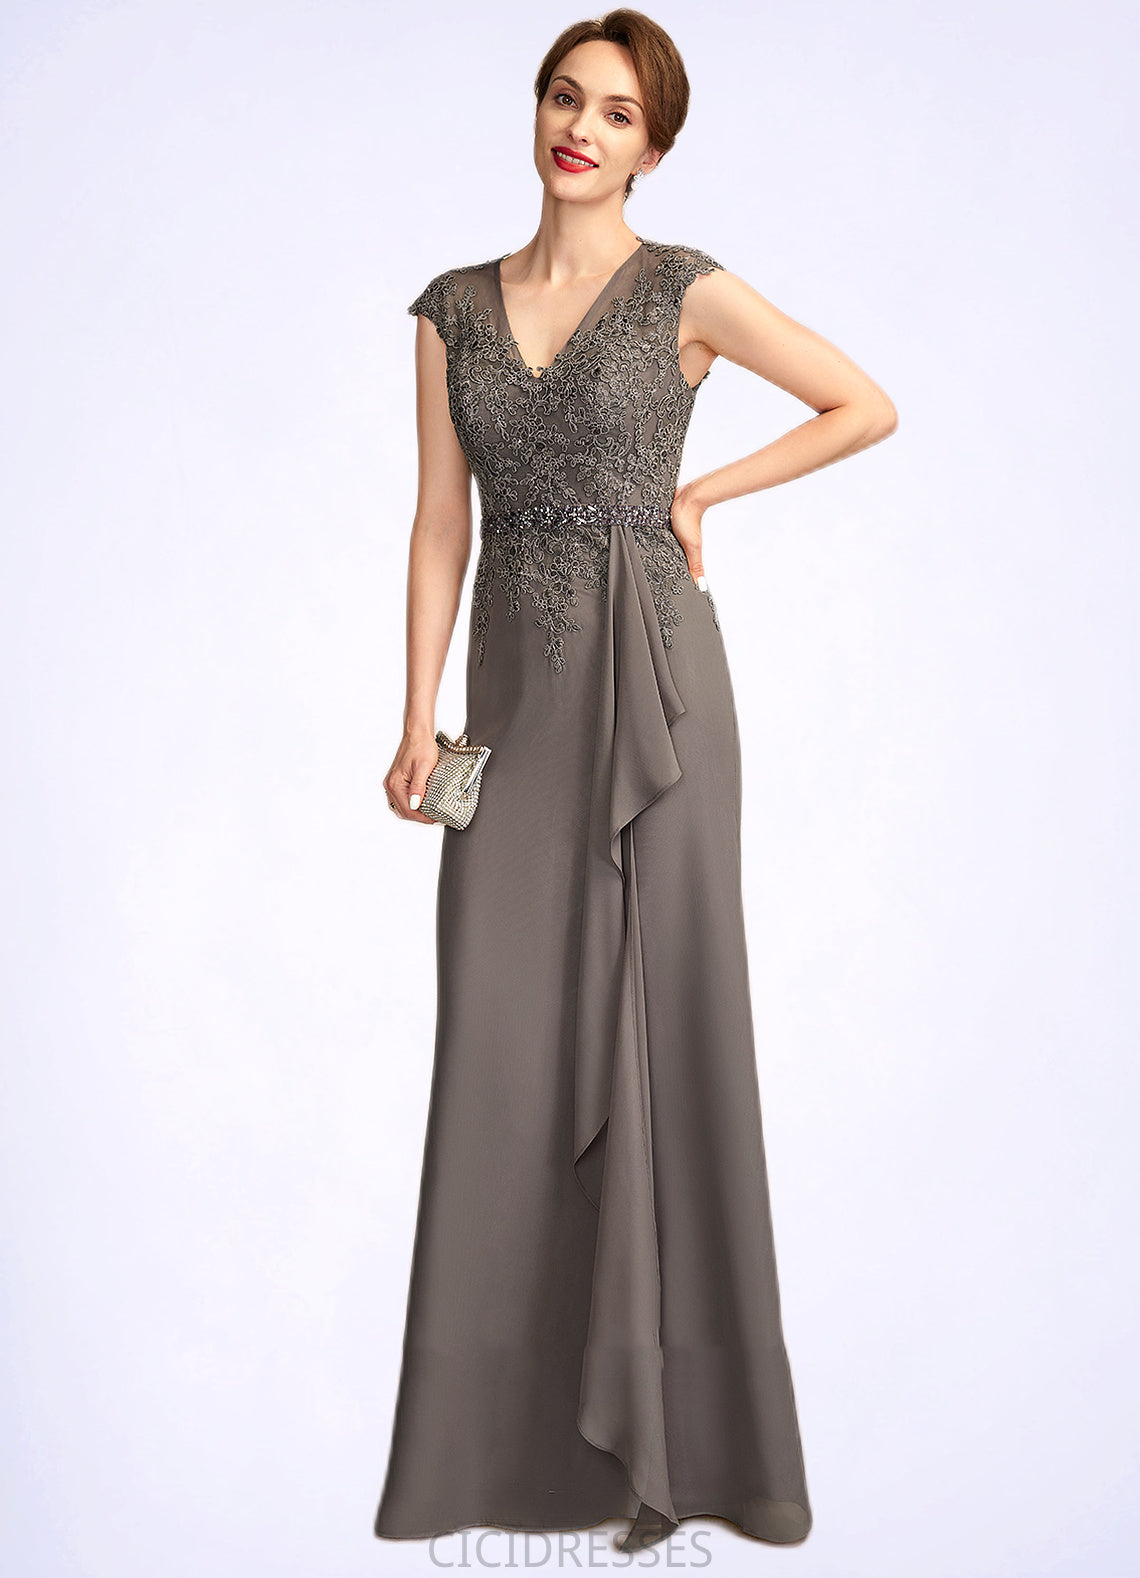 Jenny A-Line V-neck Floor-Length Chiffon Lace Mother of the Bride Dress With Beading Sequins Cascading Ruffles CIC8126P0015030